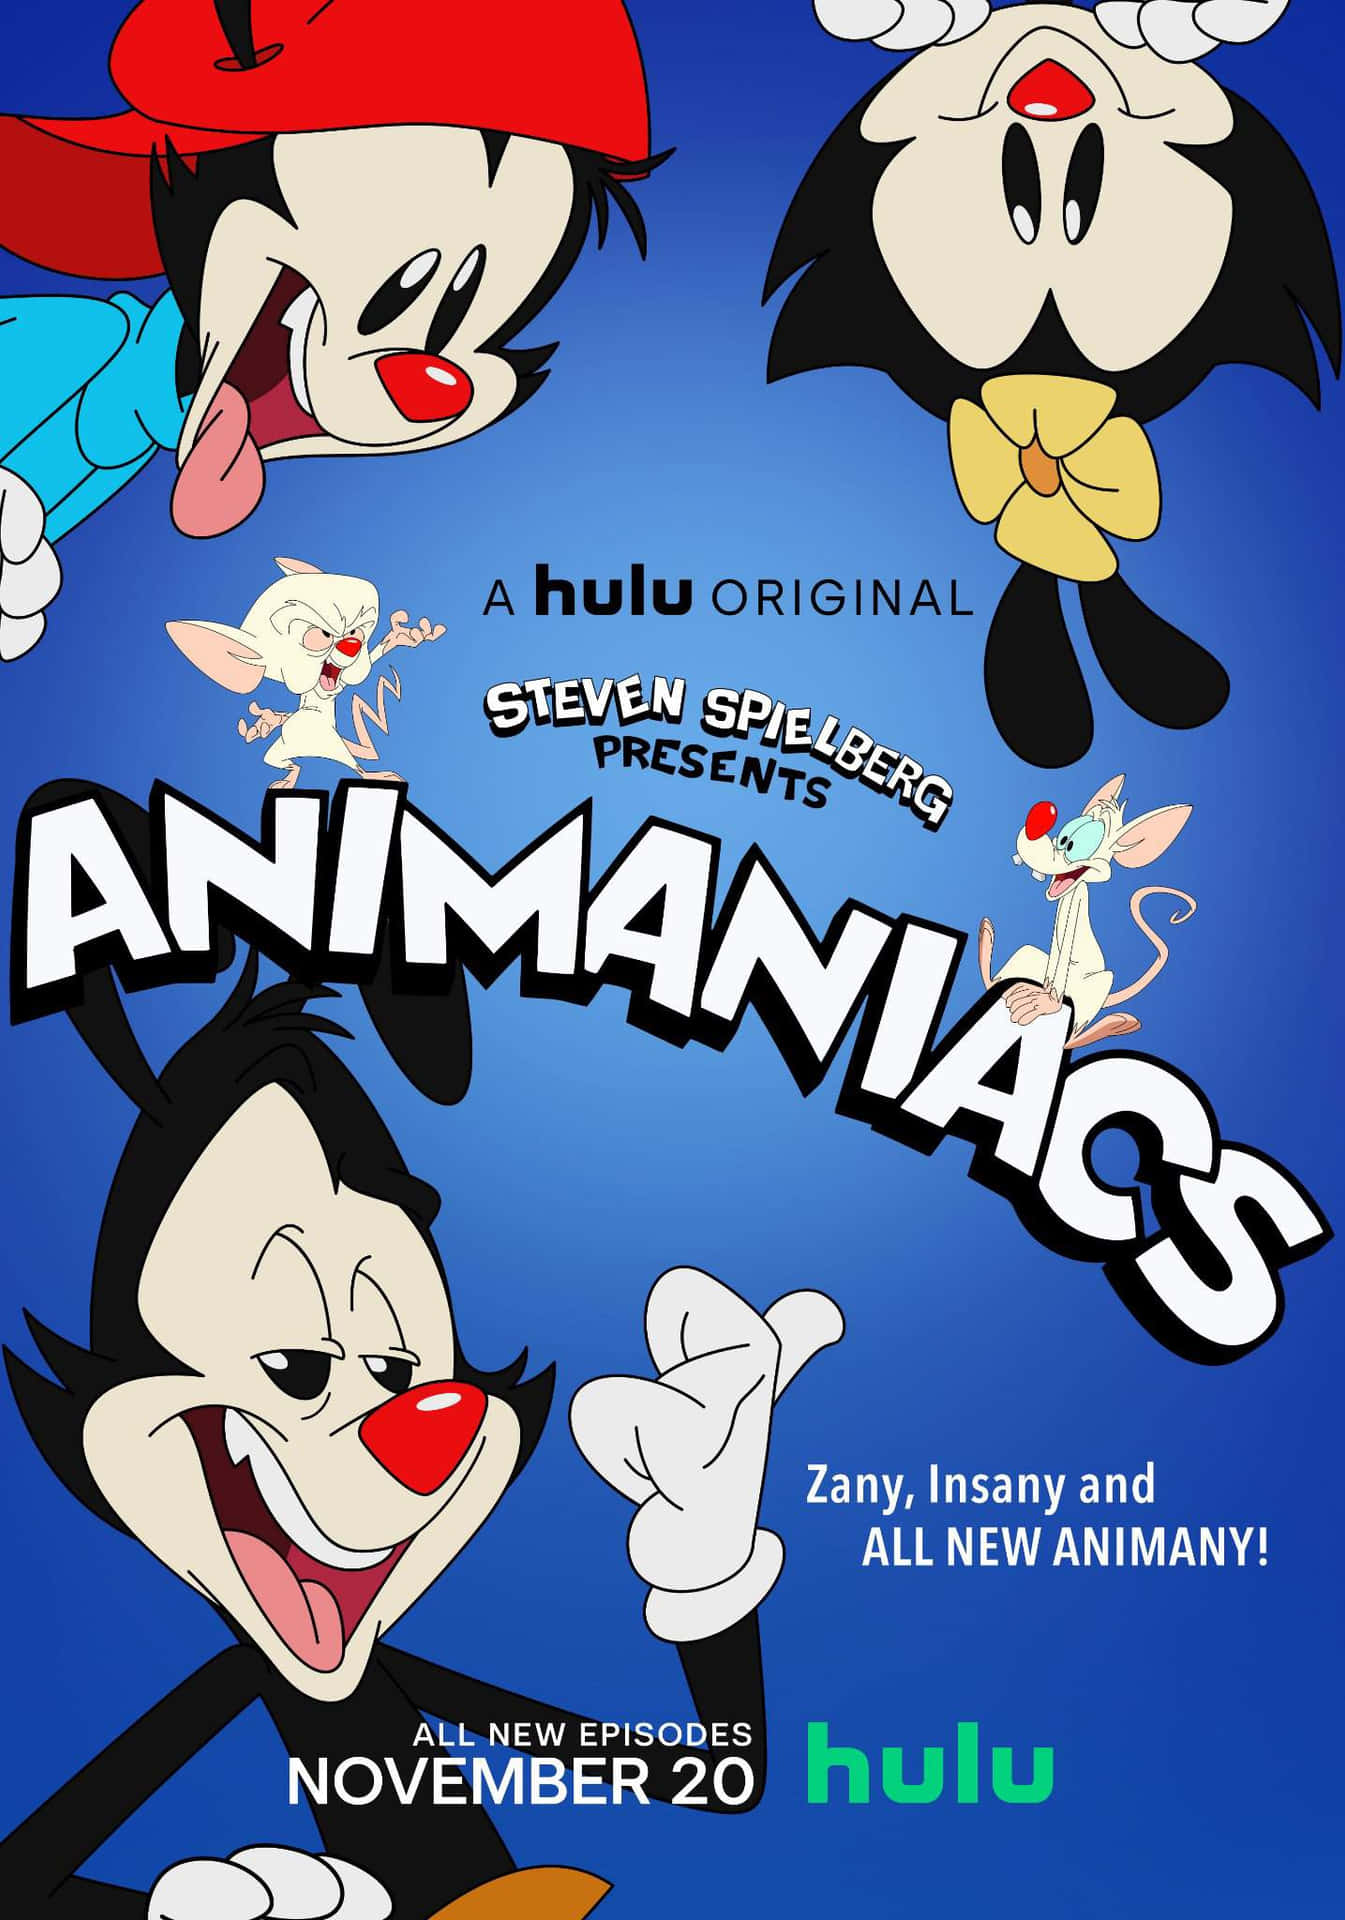 Welcome to the World of Animaniacs